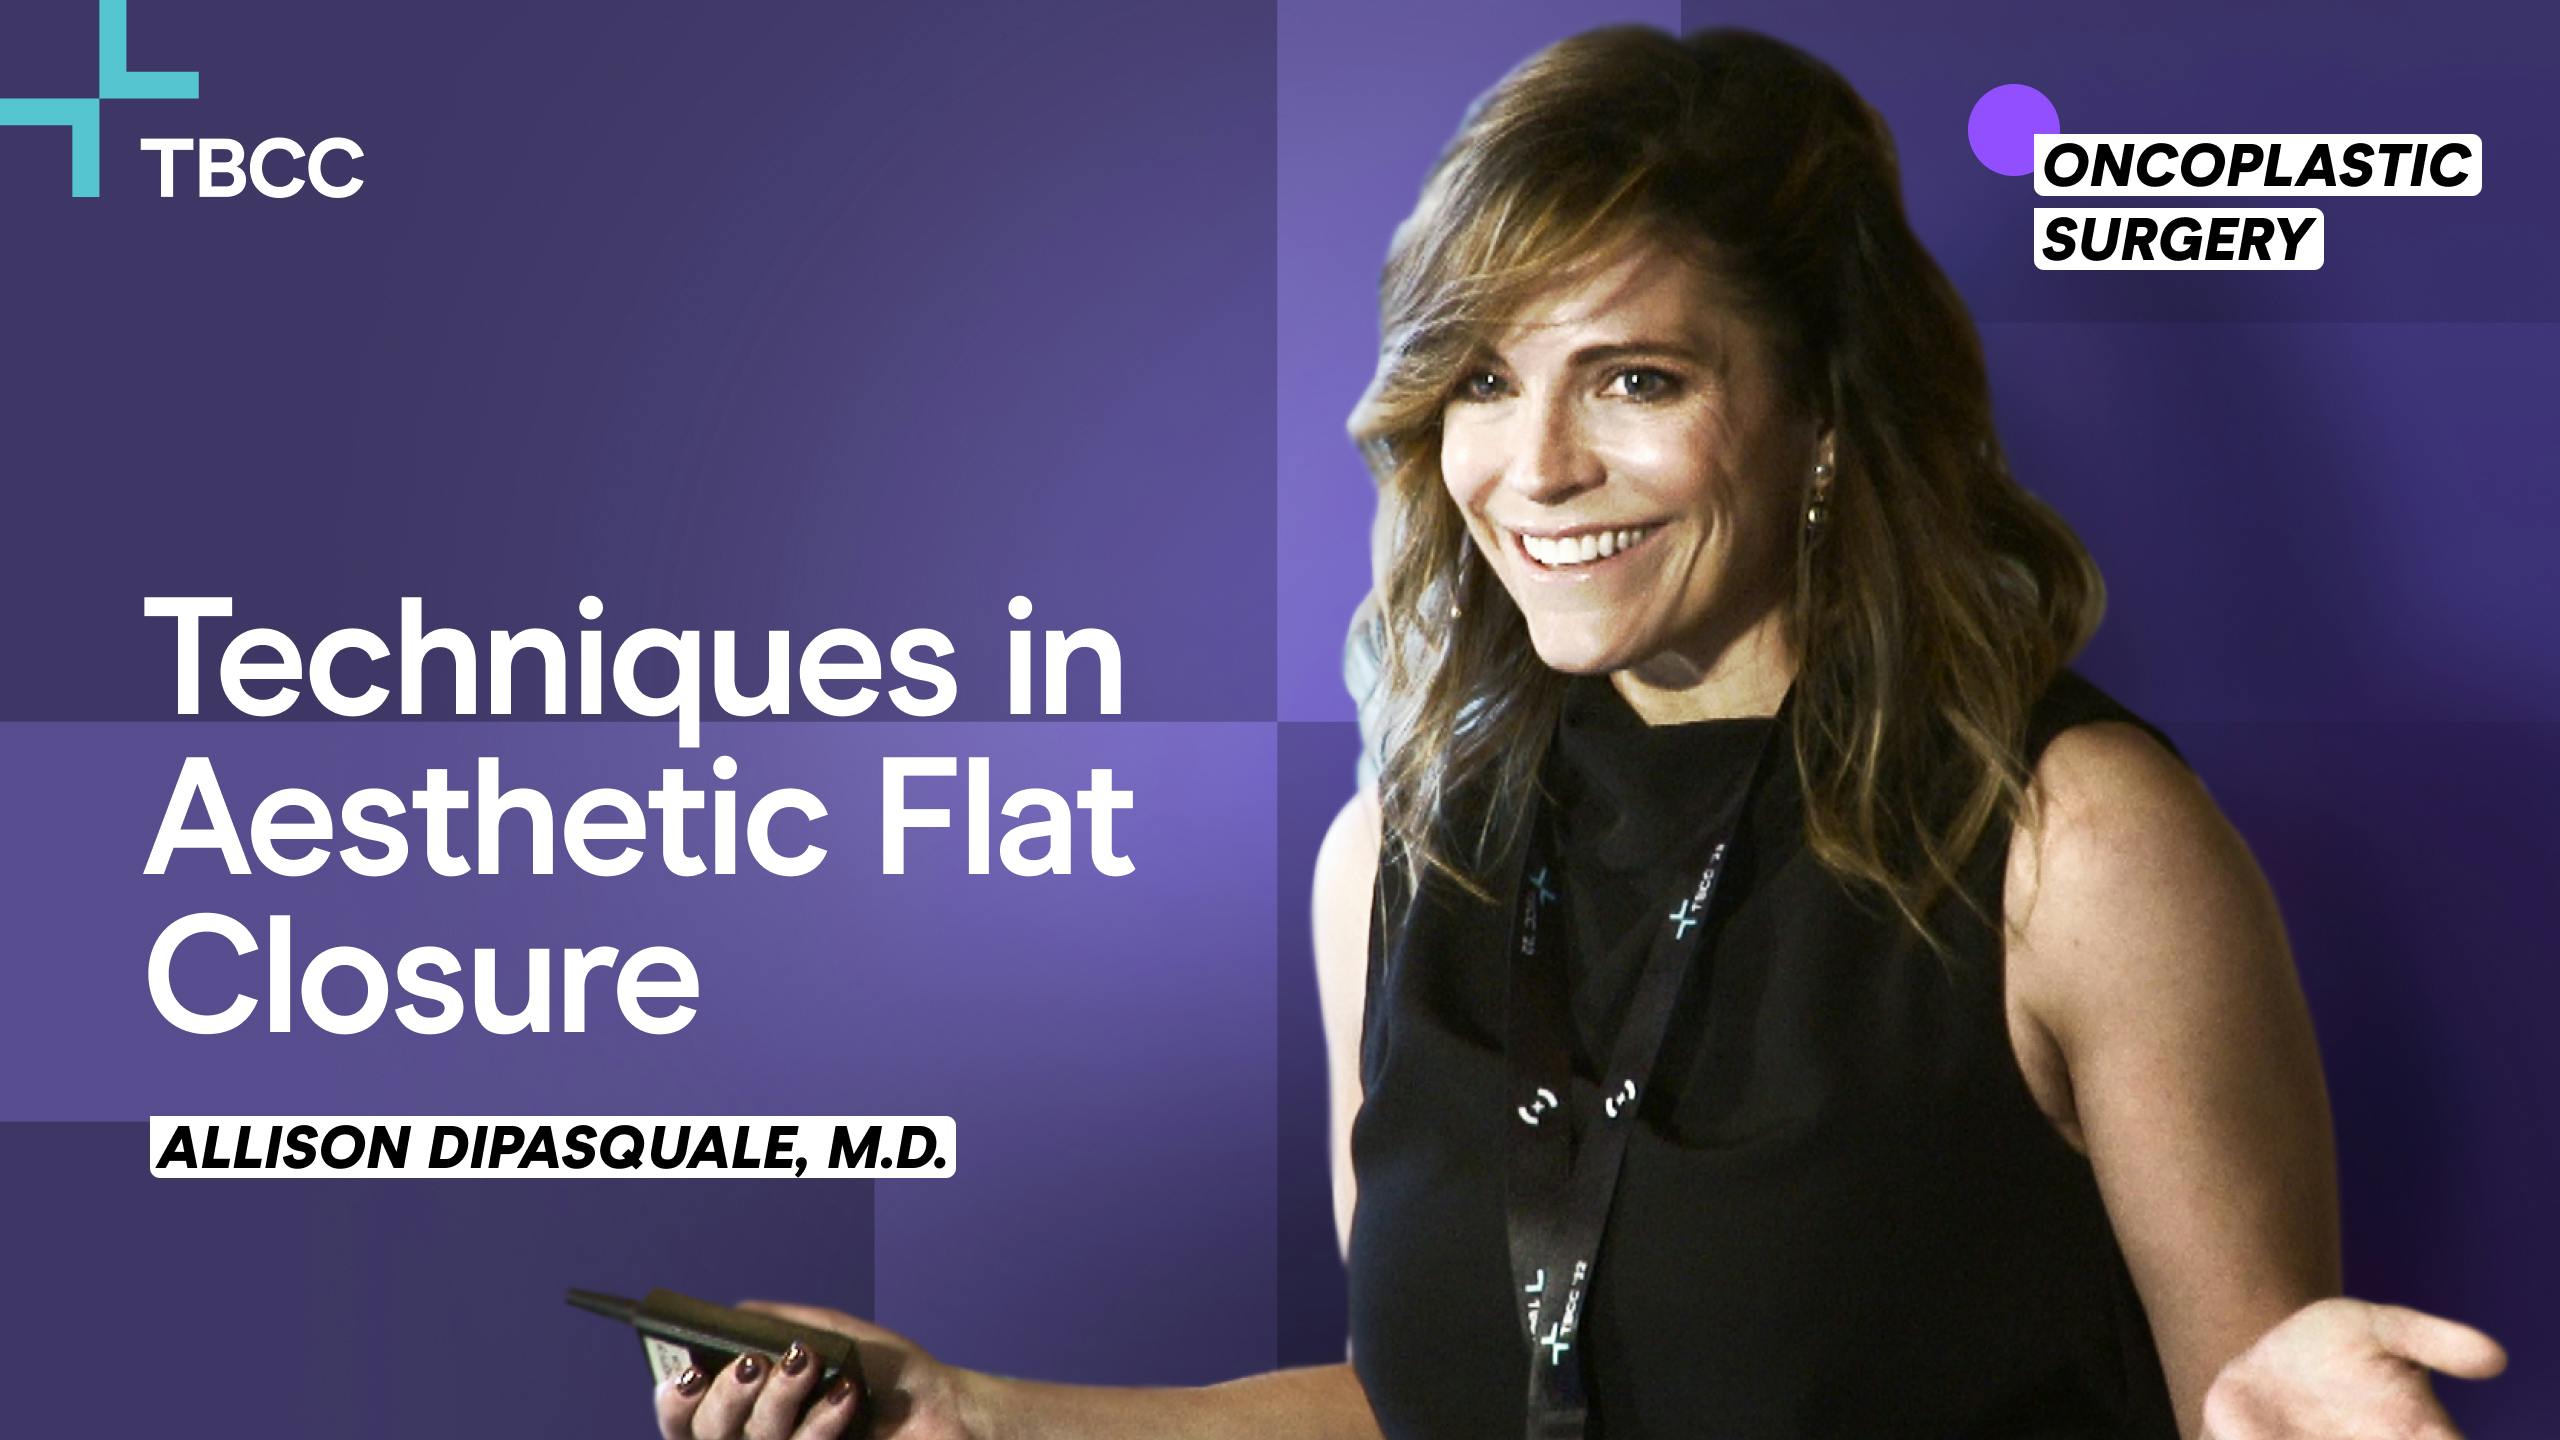 Perfecting the aesthetic flat closure: Allison DiPasquale, MD